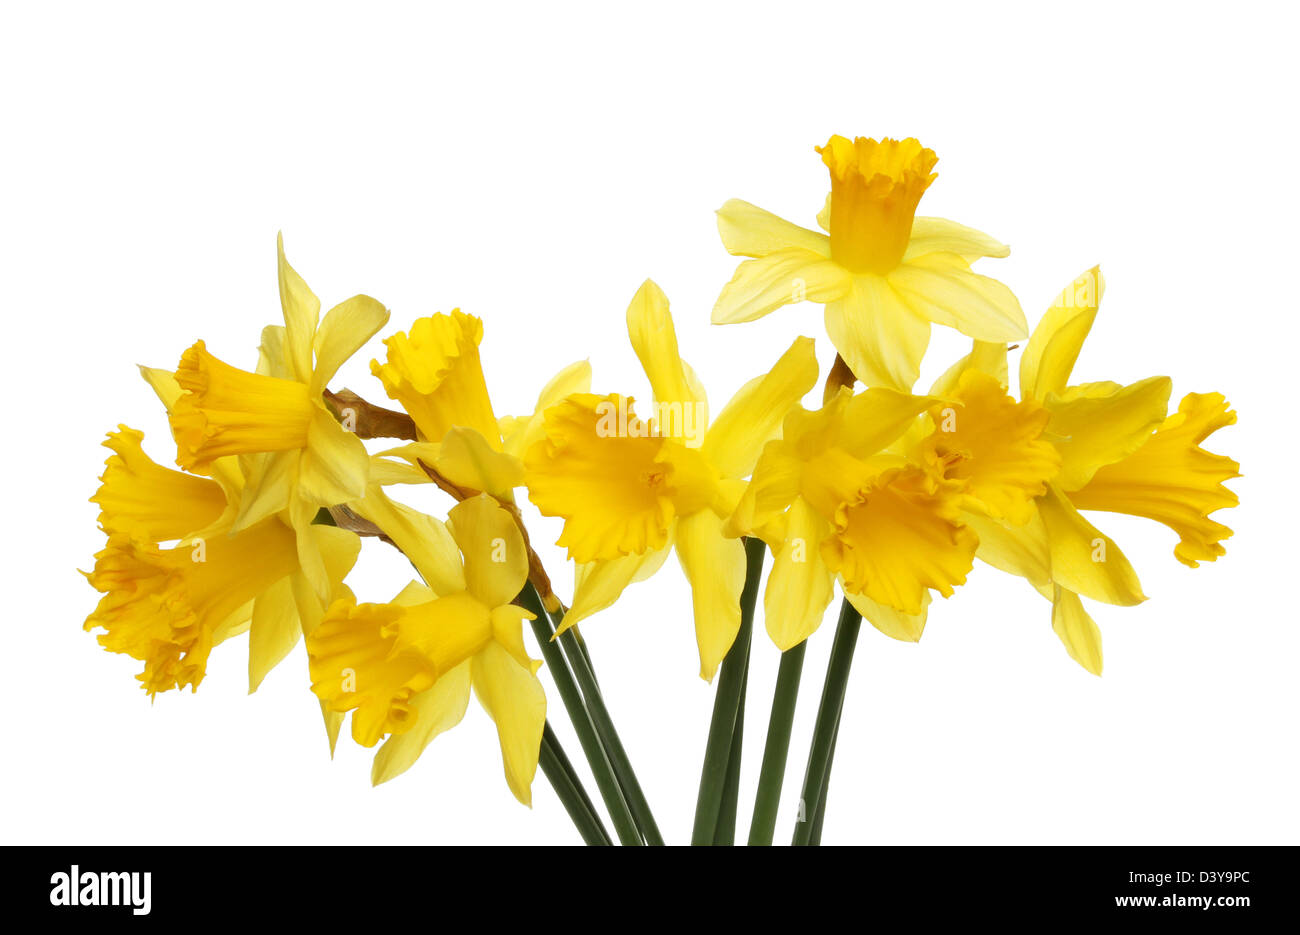 Spray of golden yellow daffodils isolated against white Stock Photo